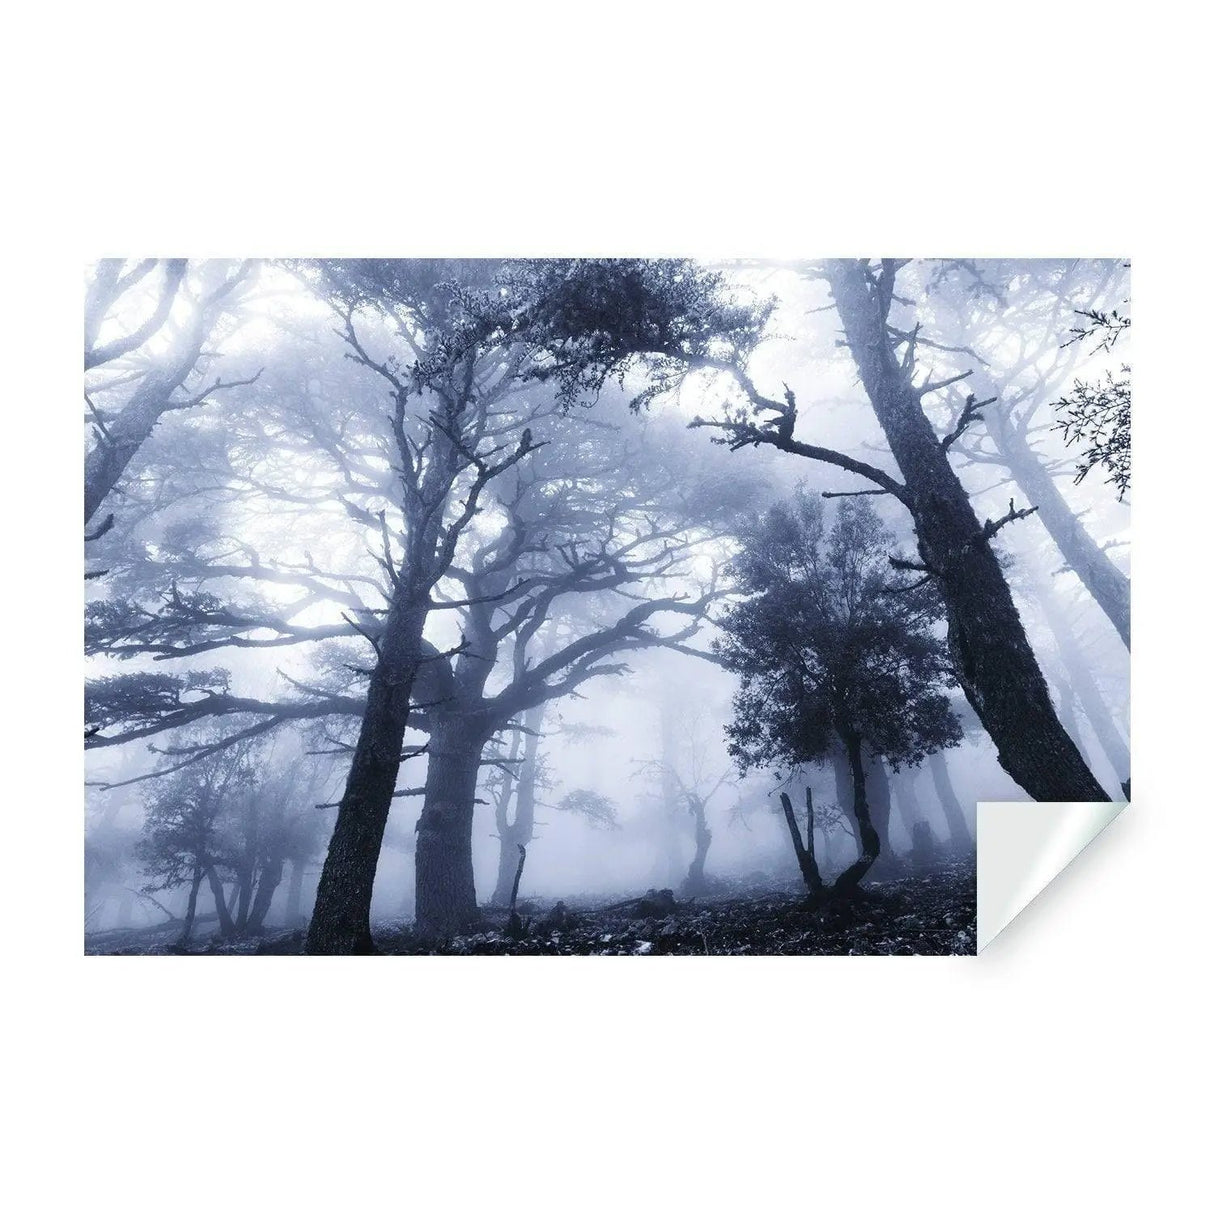 Foggy Forest Decal Wallpaper - Fog Tree Removable Wall Paper Sticker Mural Art - Large Bedroom Dark Misty Nature Decor Peel And Stick - Decords